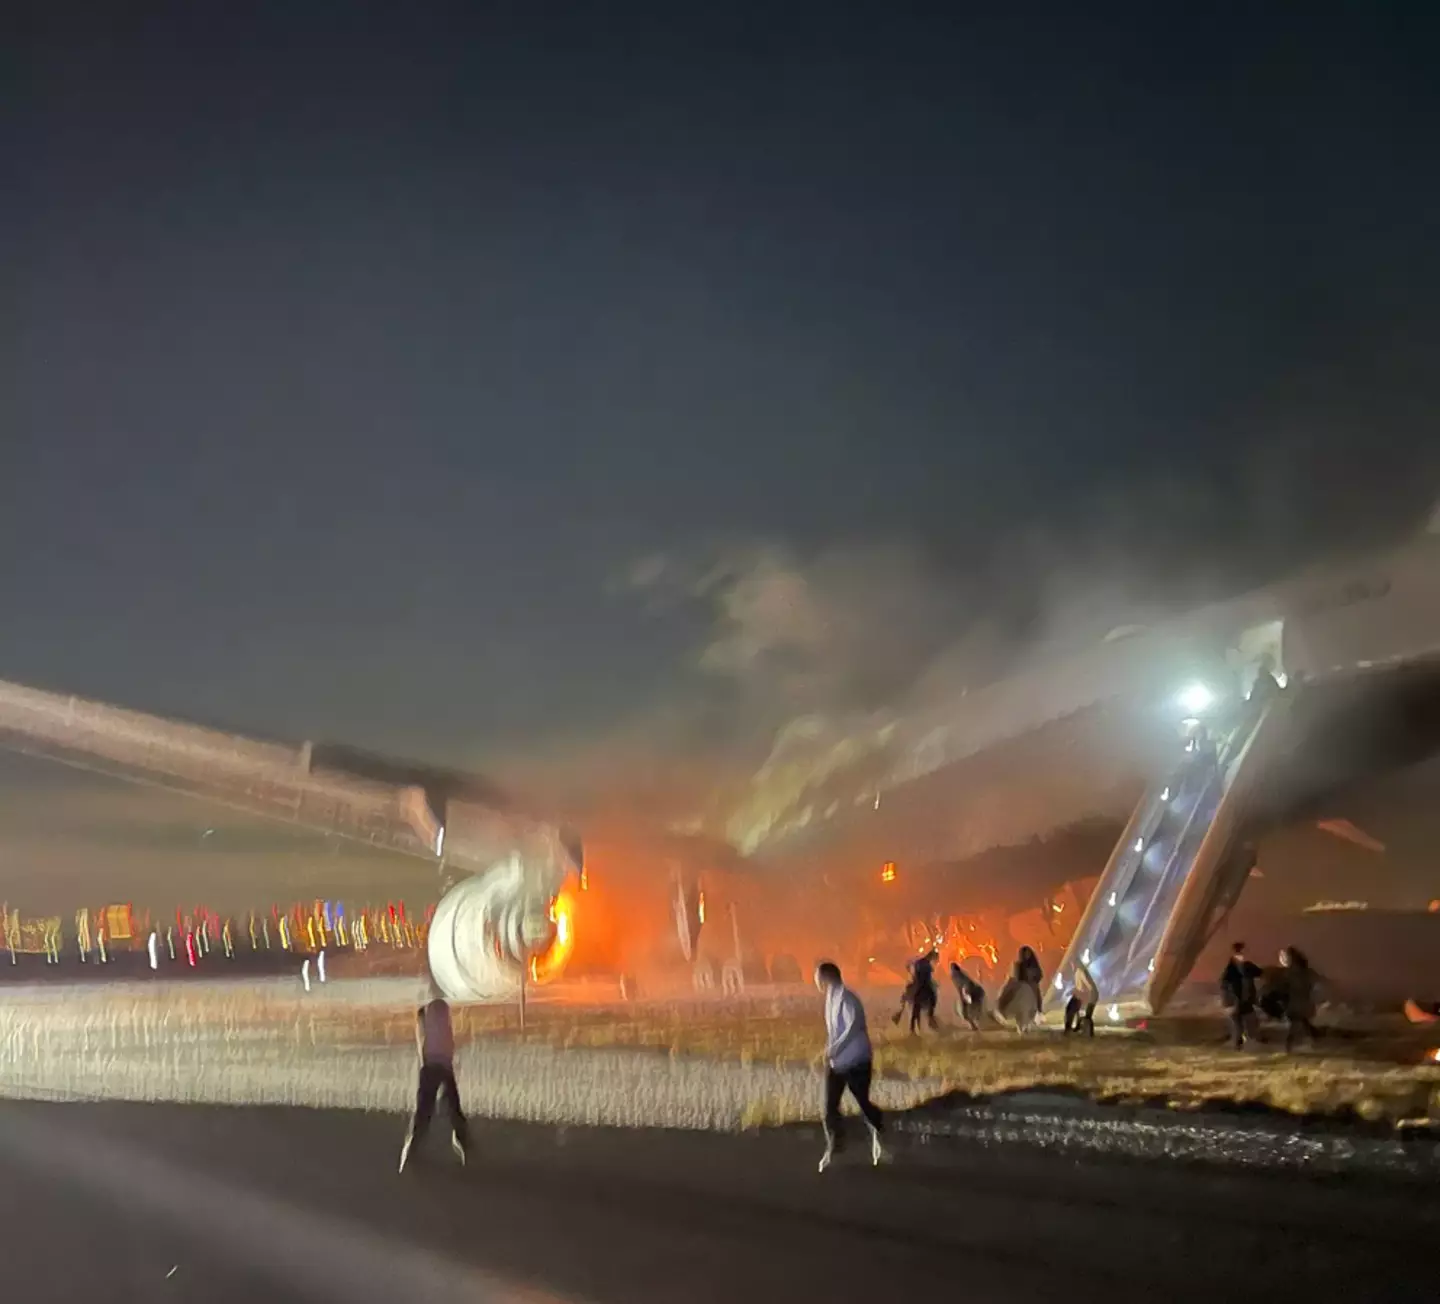 Images have emerged of the plane in flames.